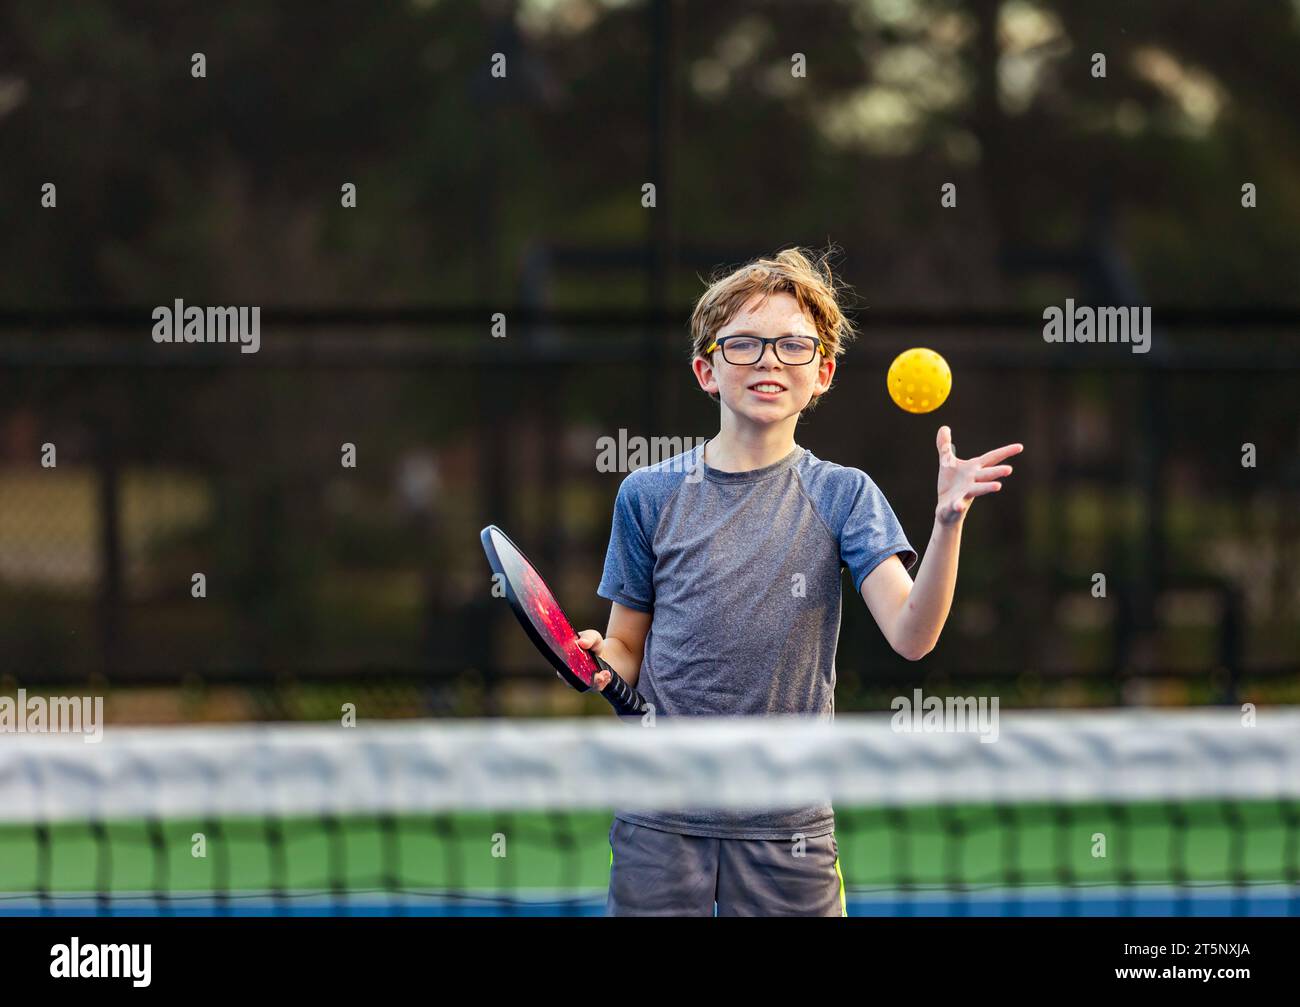 Young Boy playing pickleball on court Stock Photo